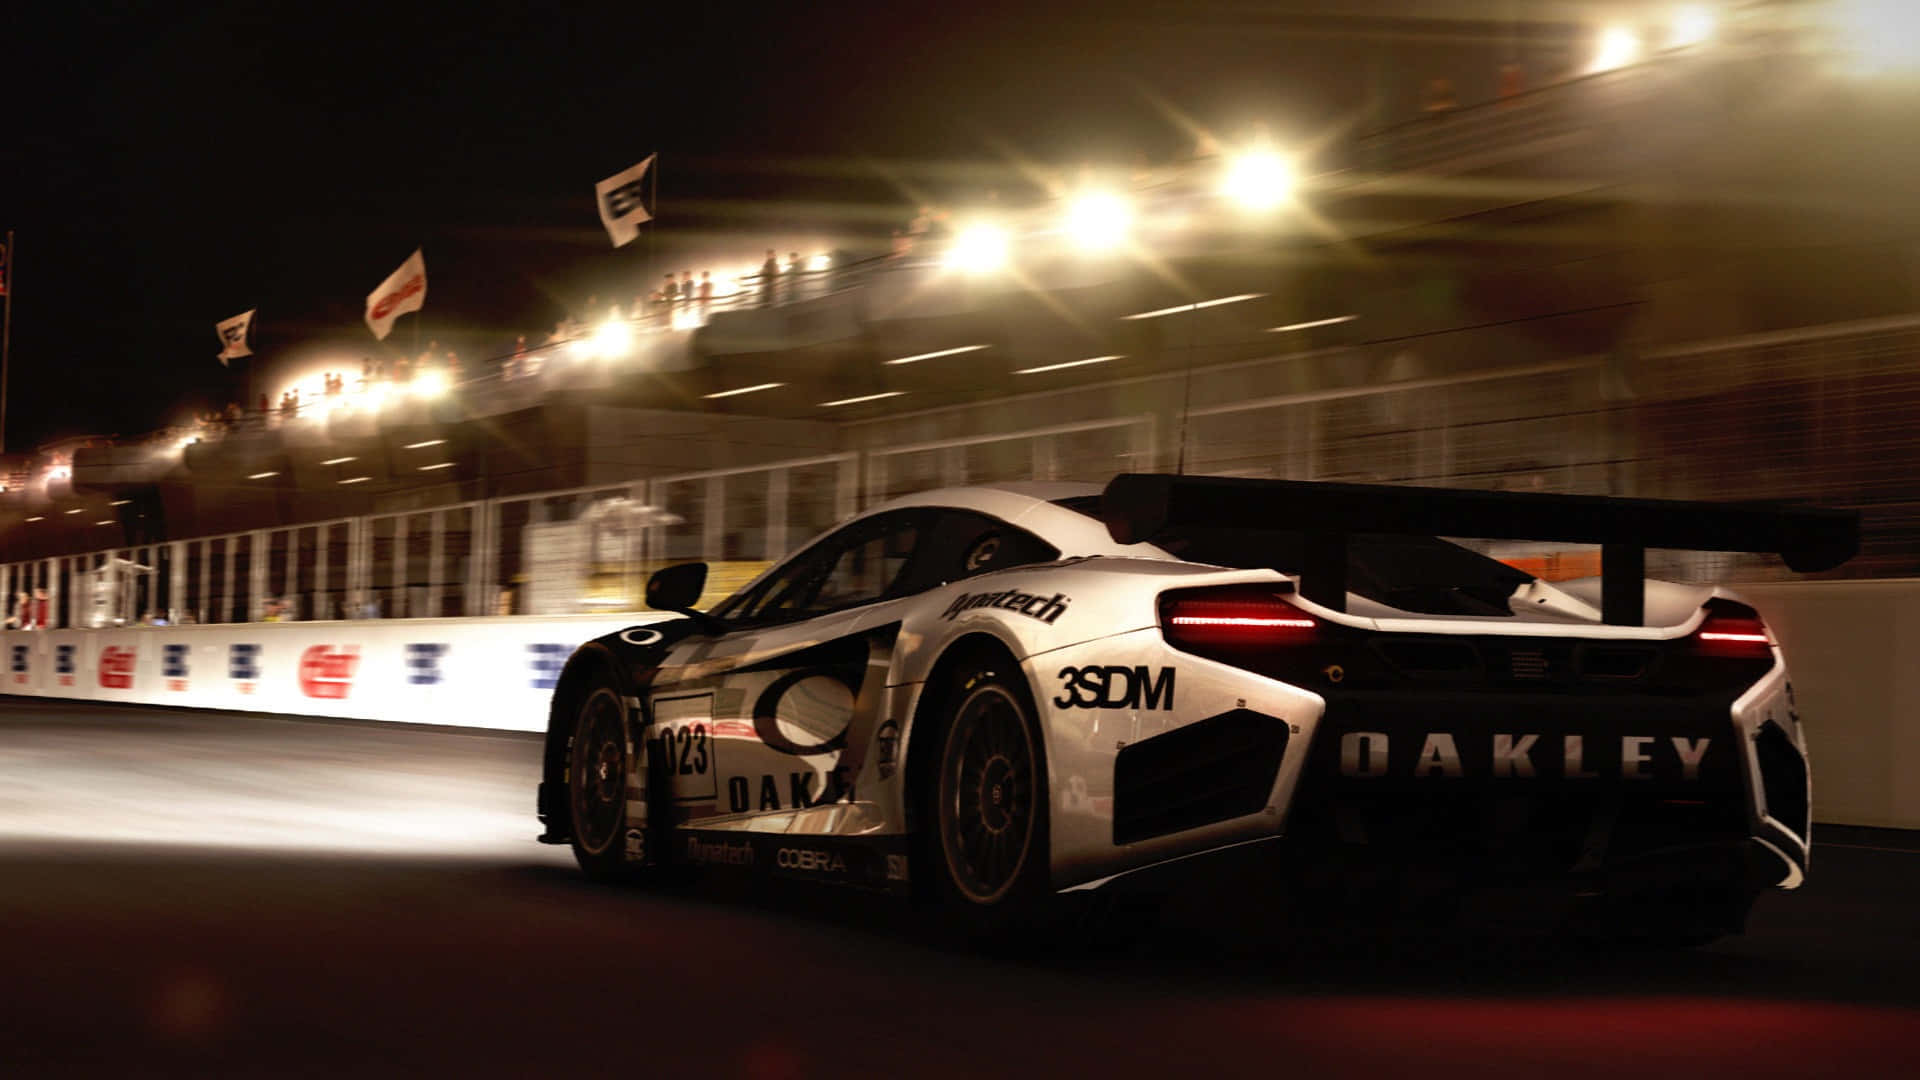 A White And Black Racing Car Driving On A Track At Night